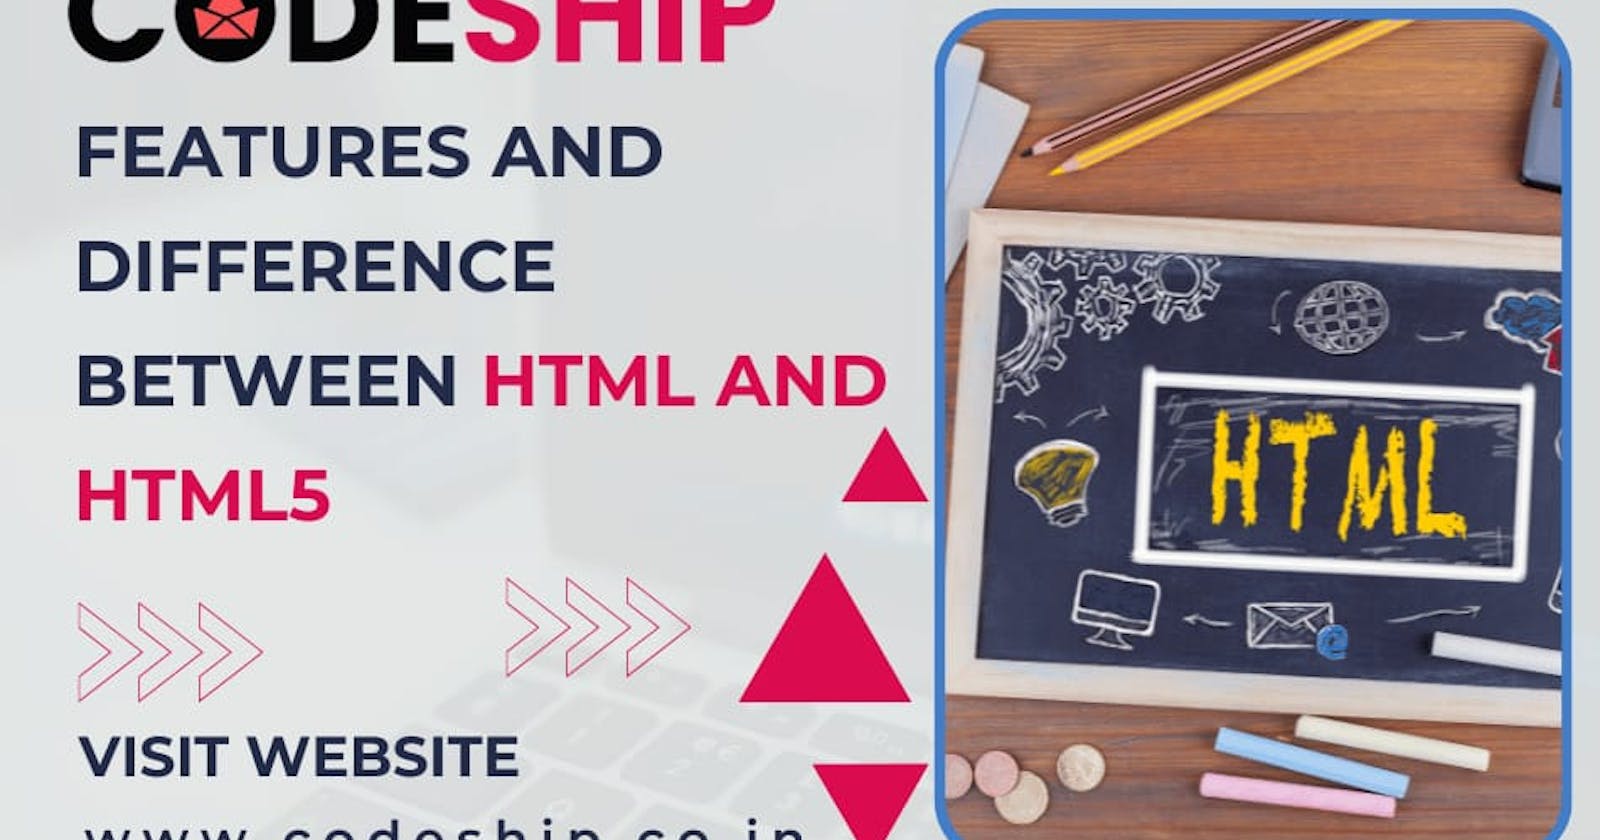 Features and differences between HTML and HTML5